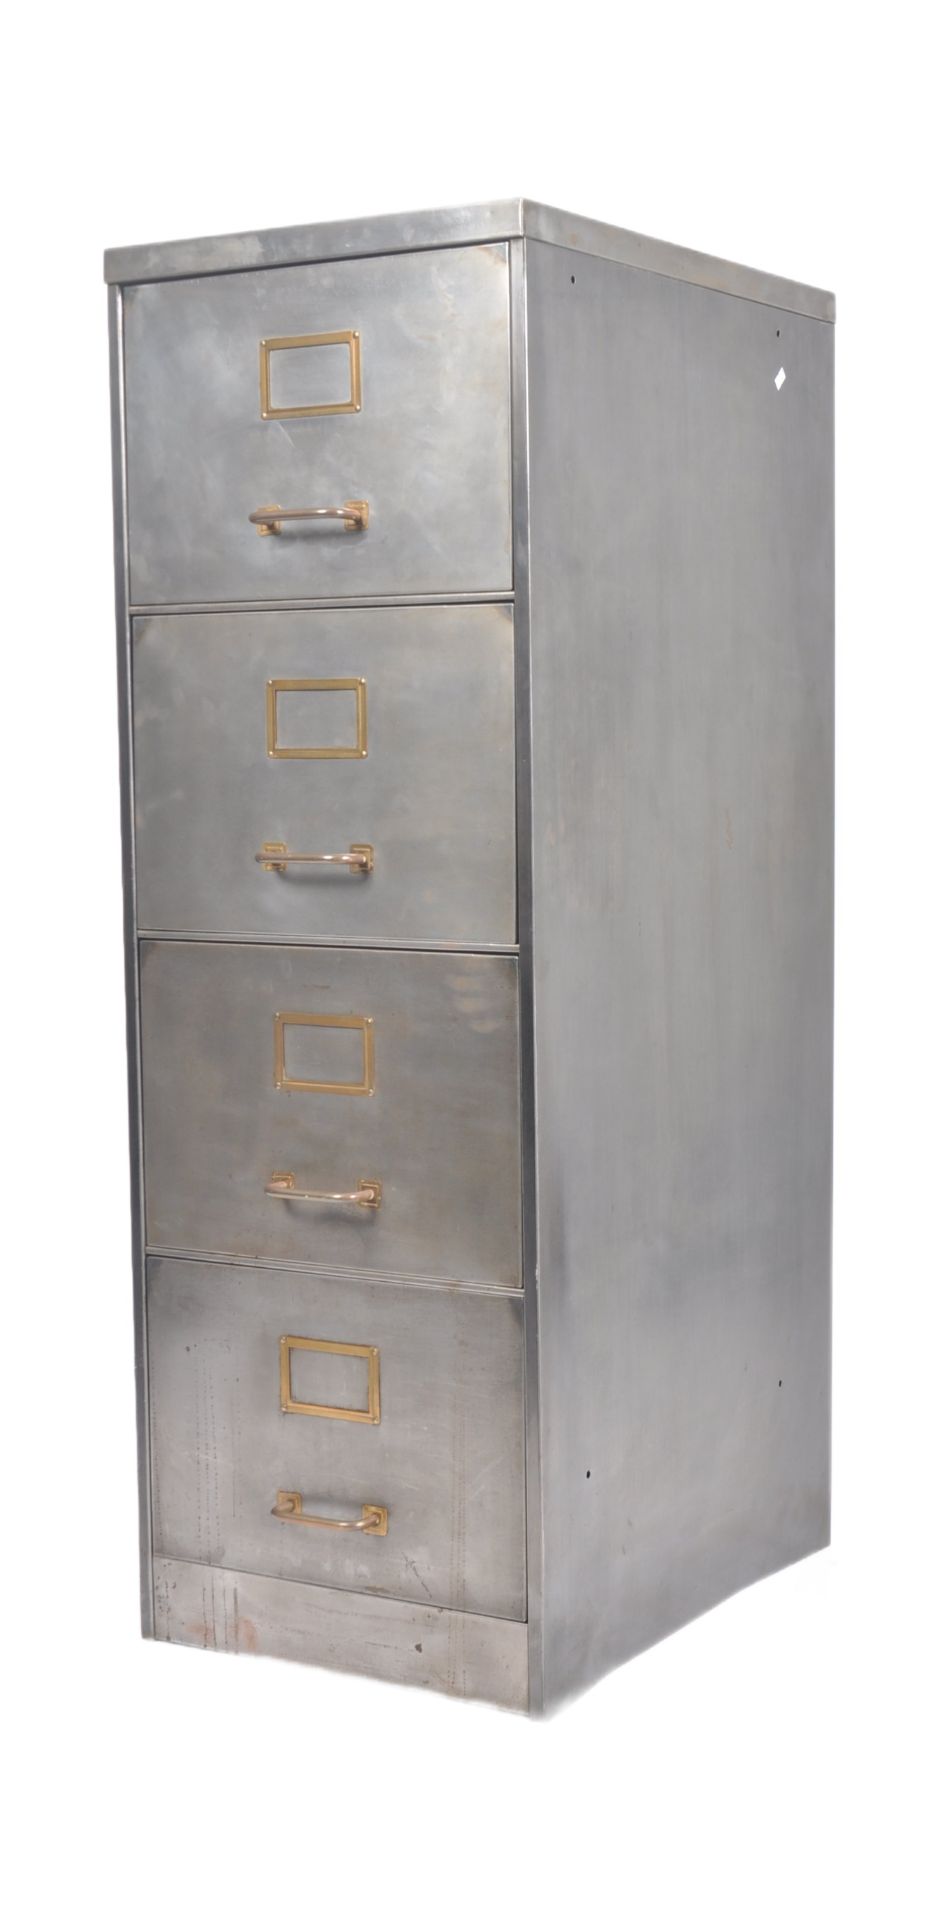 20TH CENTURY INDUSTRIAL / OFFICE UPRIGHT FILING CABINET